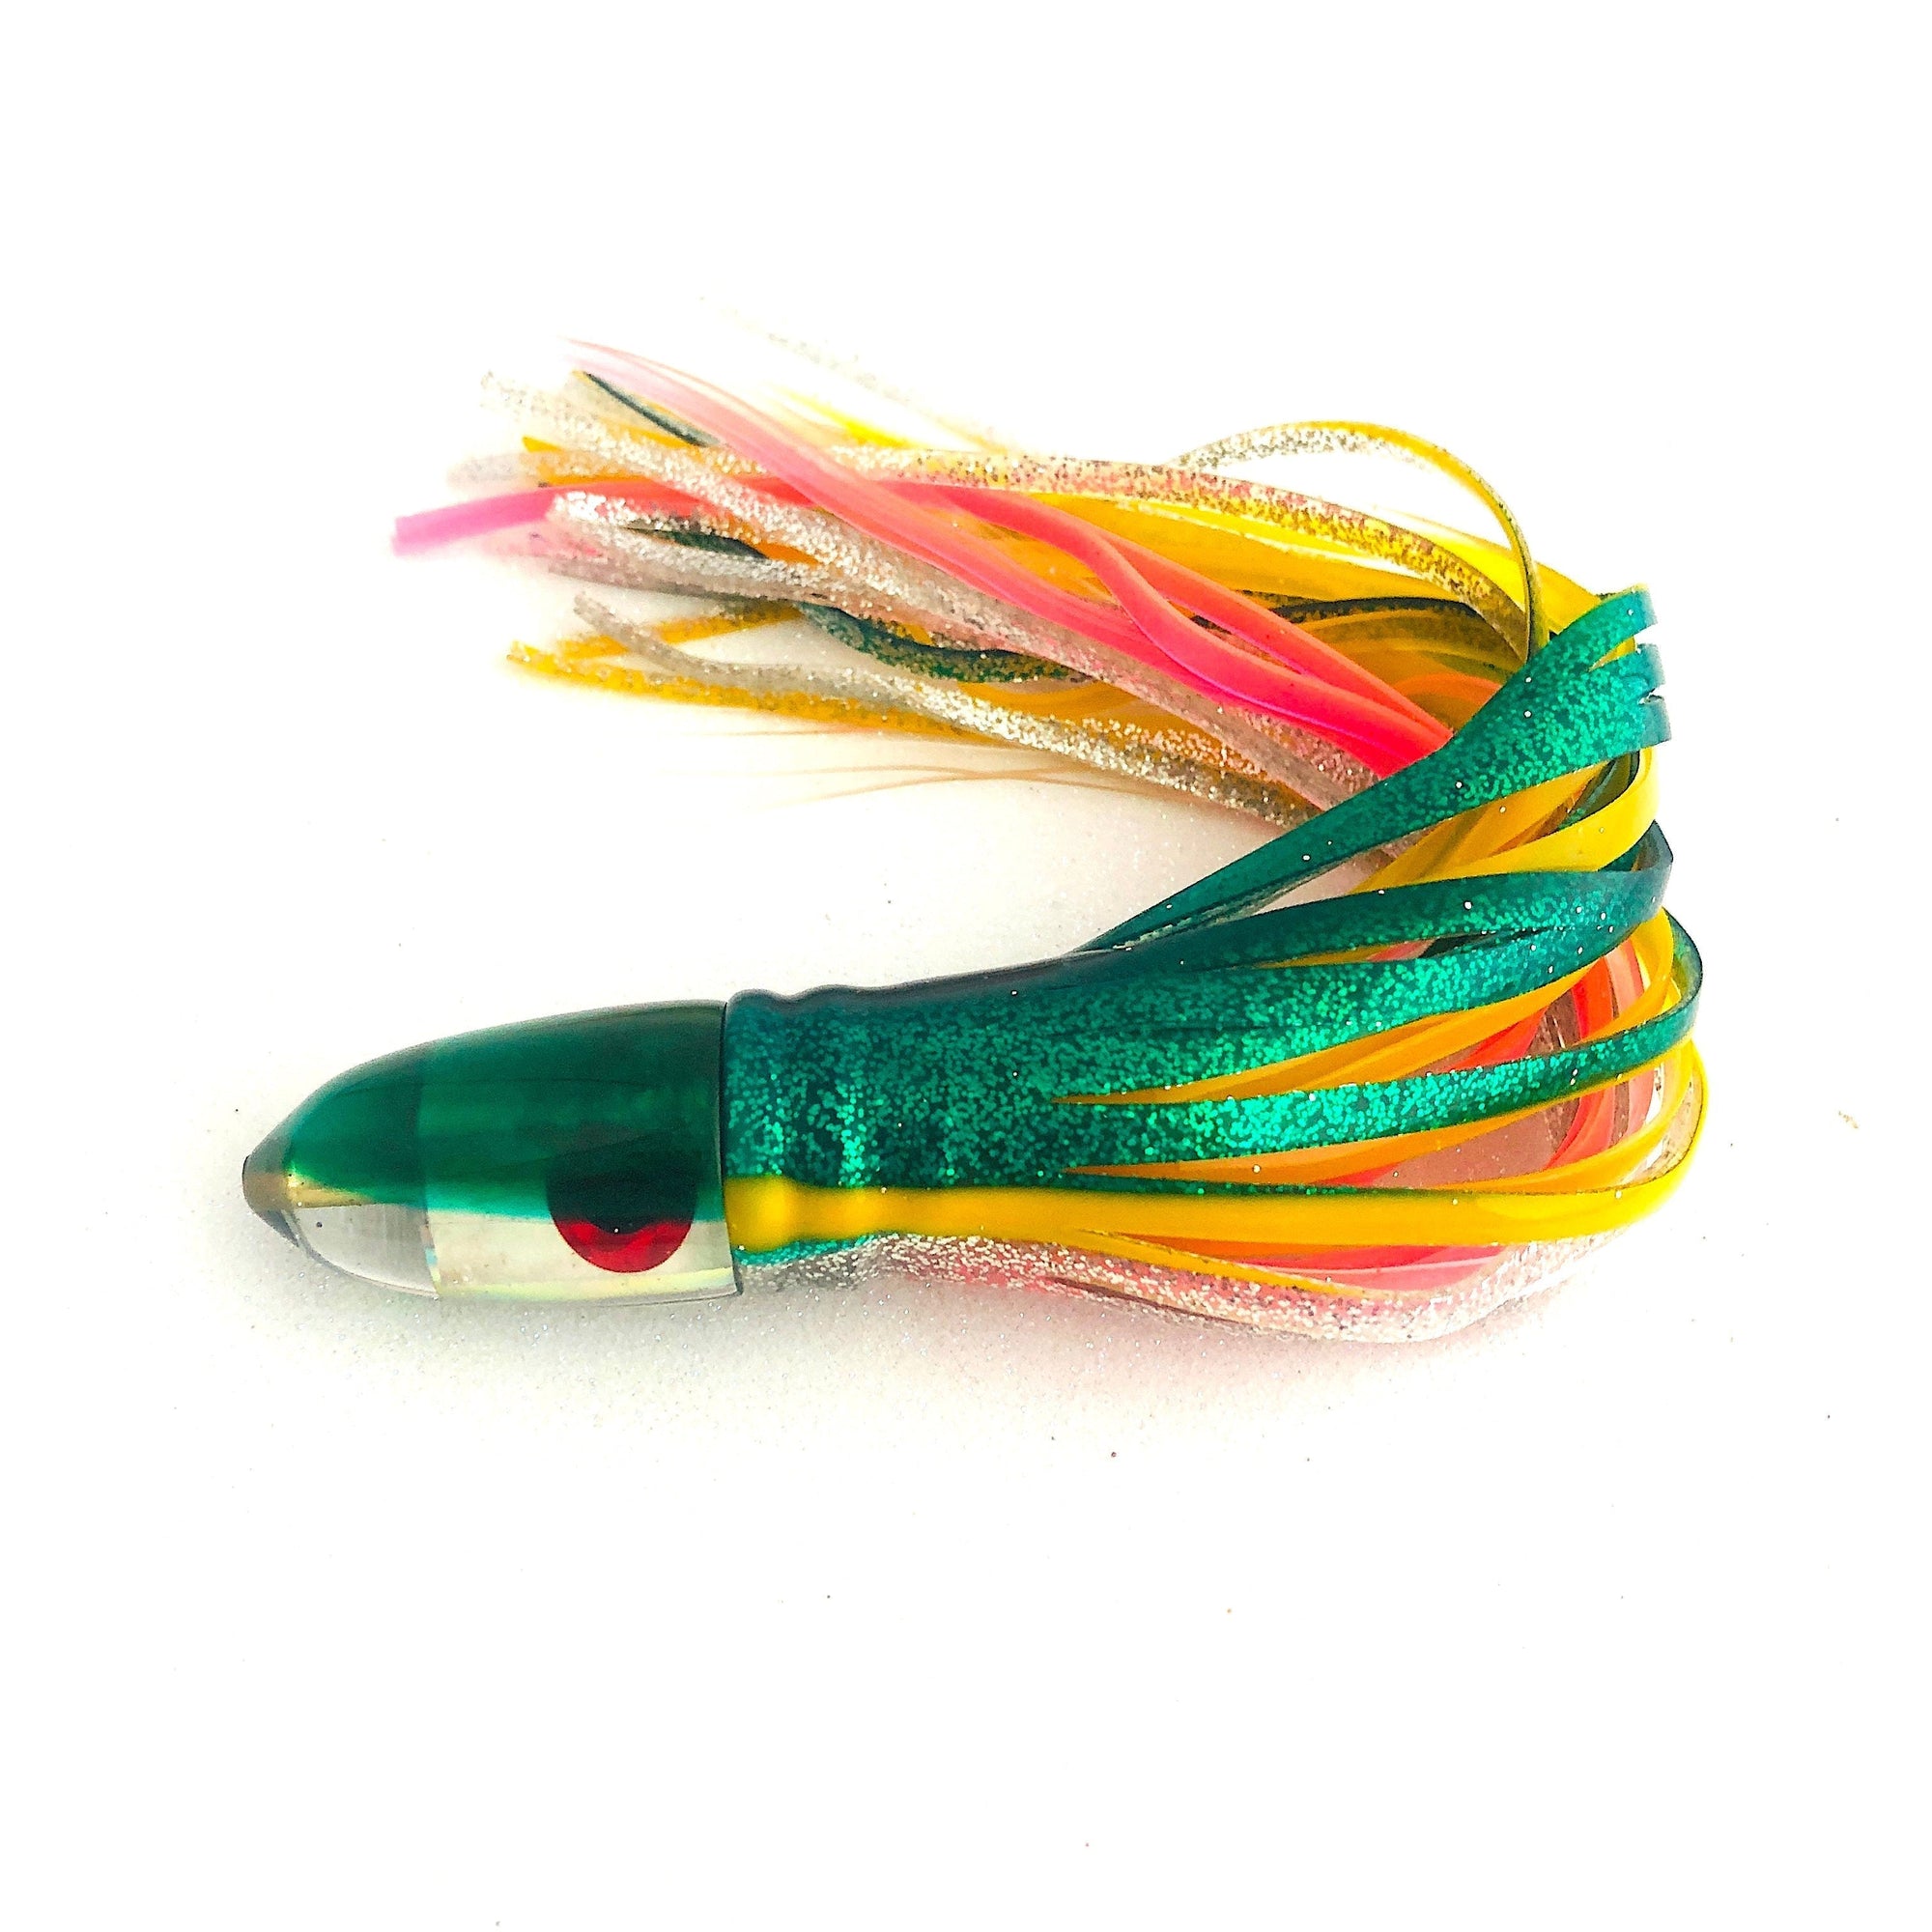 Bomboy Lures-RESTOCK! The 9" Bullet Baby Bomb by Bomboy Lures Skirted- New-New Lures